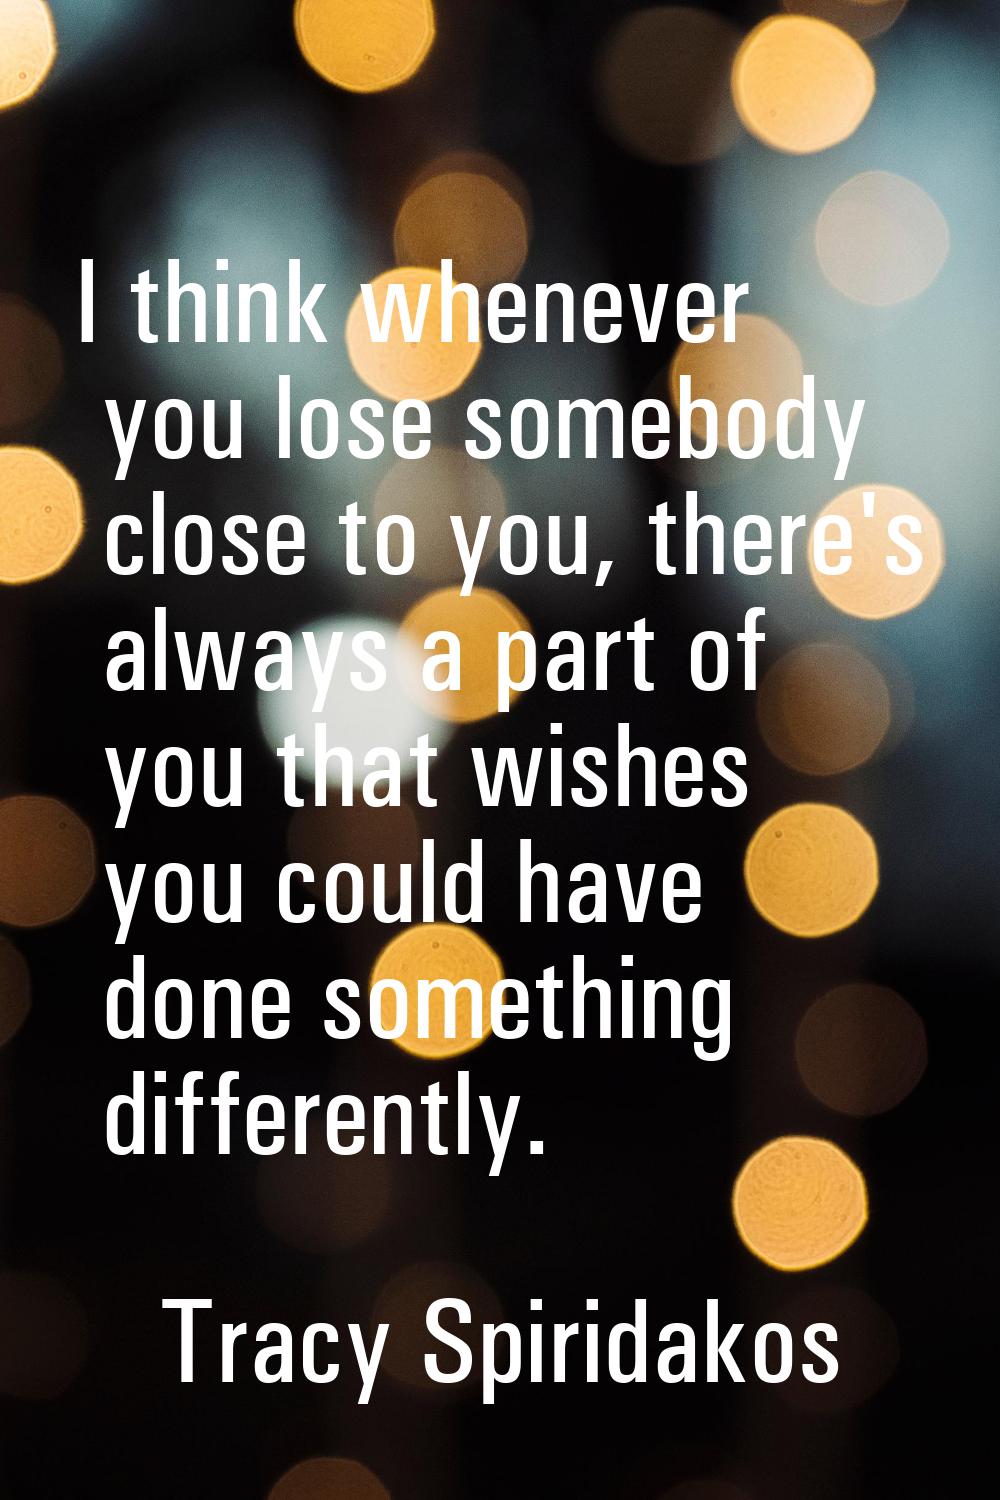 I think whenever you lose somebody close to you, there's always a part of you that wishes you could